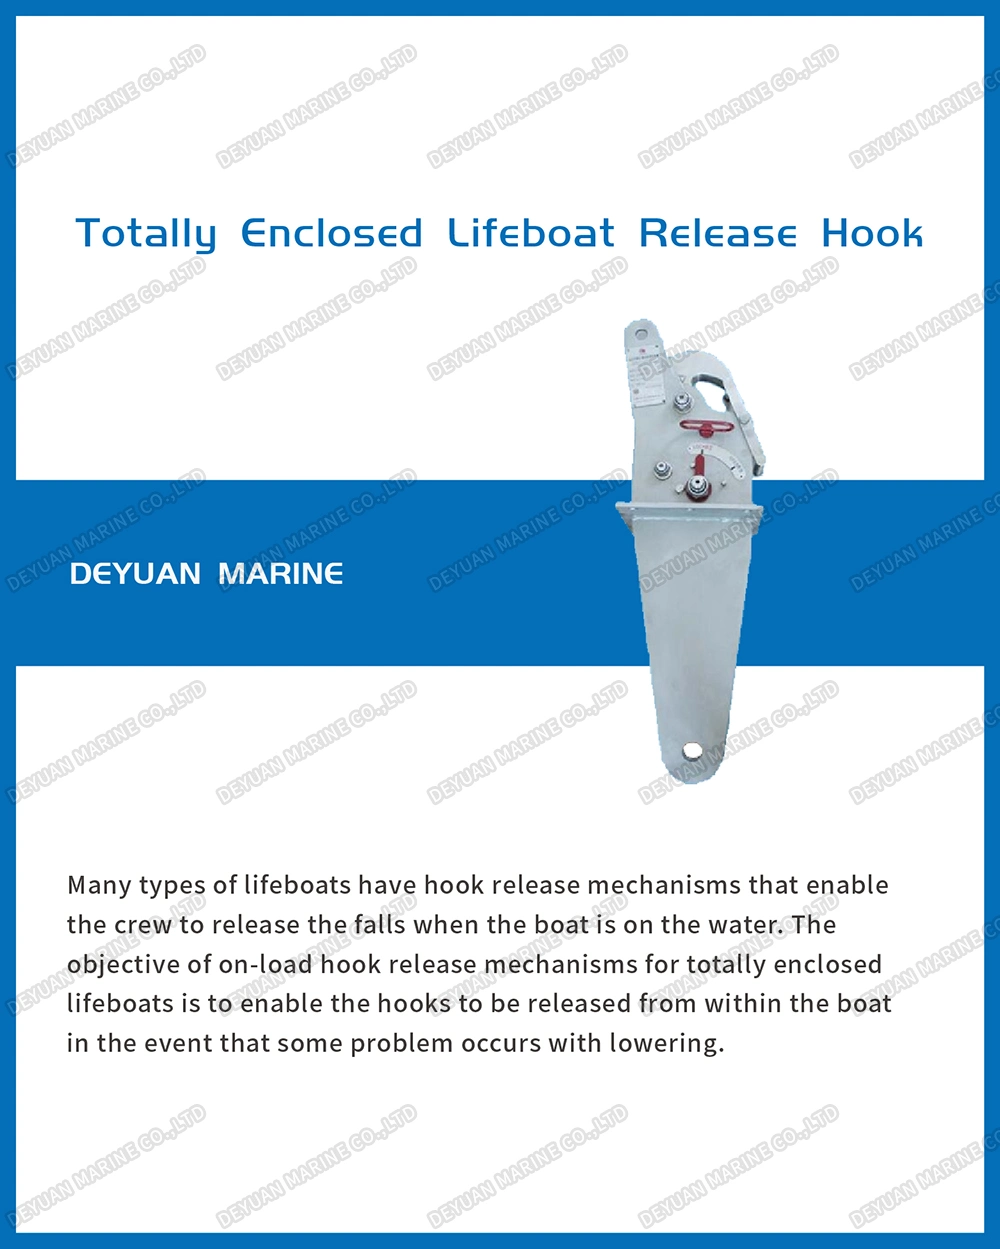 Release Hook for Totally Enclosed Lifeboat